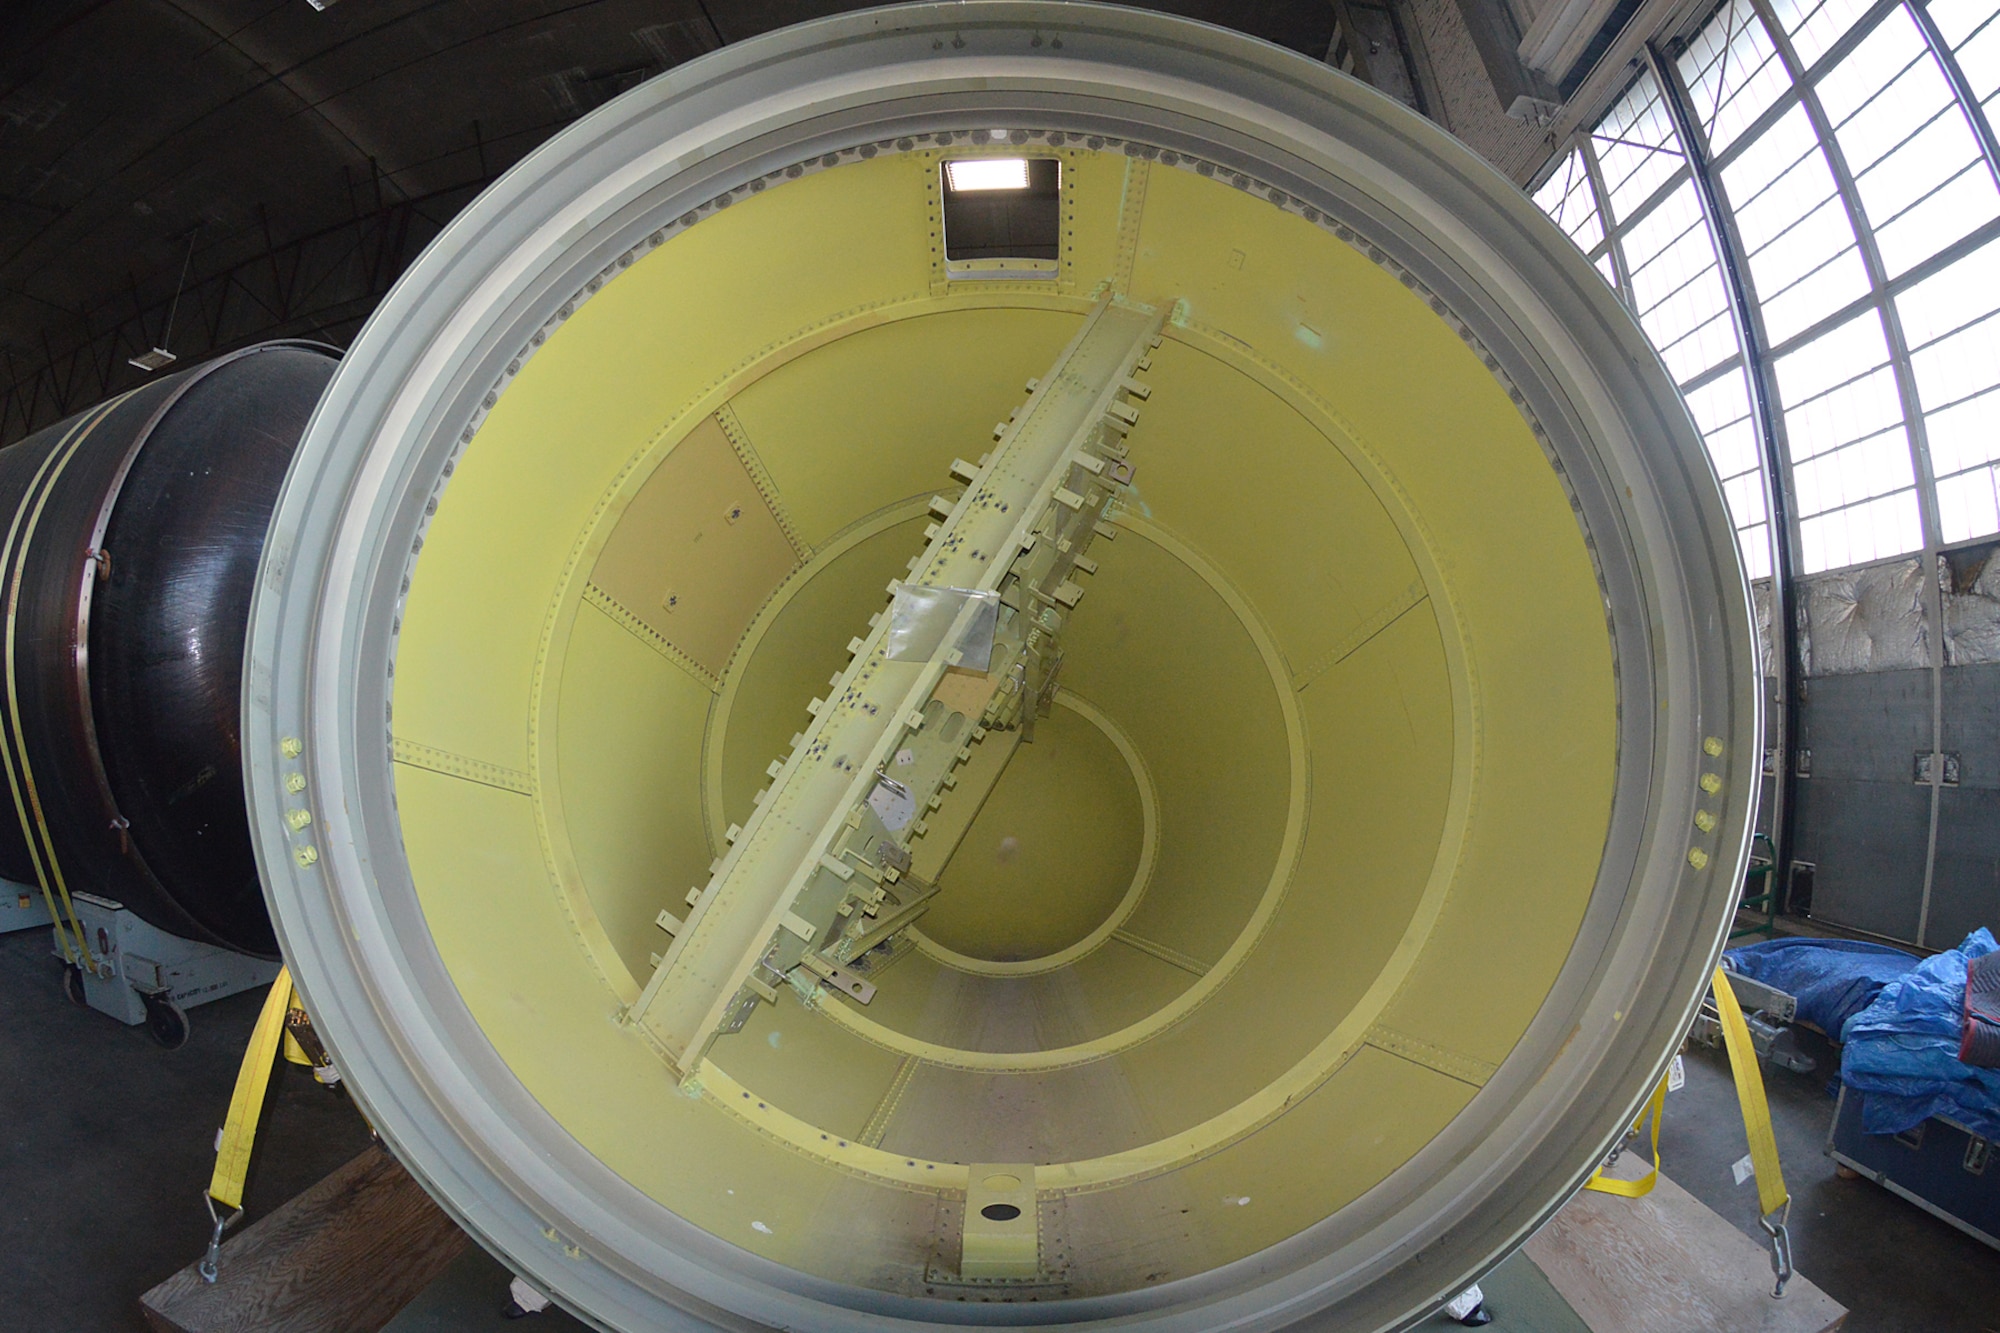 DAYTON, Ohio (08/2014) -- The Titan IVB space launch vehicle in the restoration hangar at the National Museum of the United States Air Force. This is a solid rocket motor nose cone. (U.S. Air Force photo)